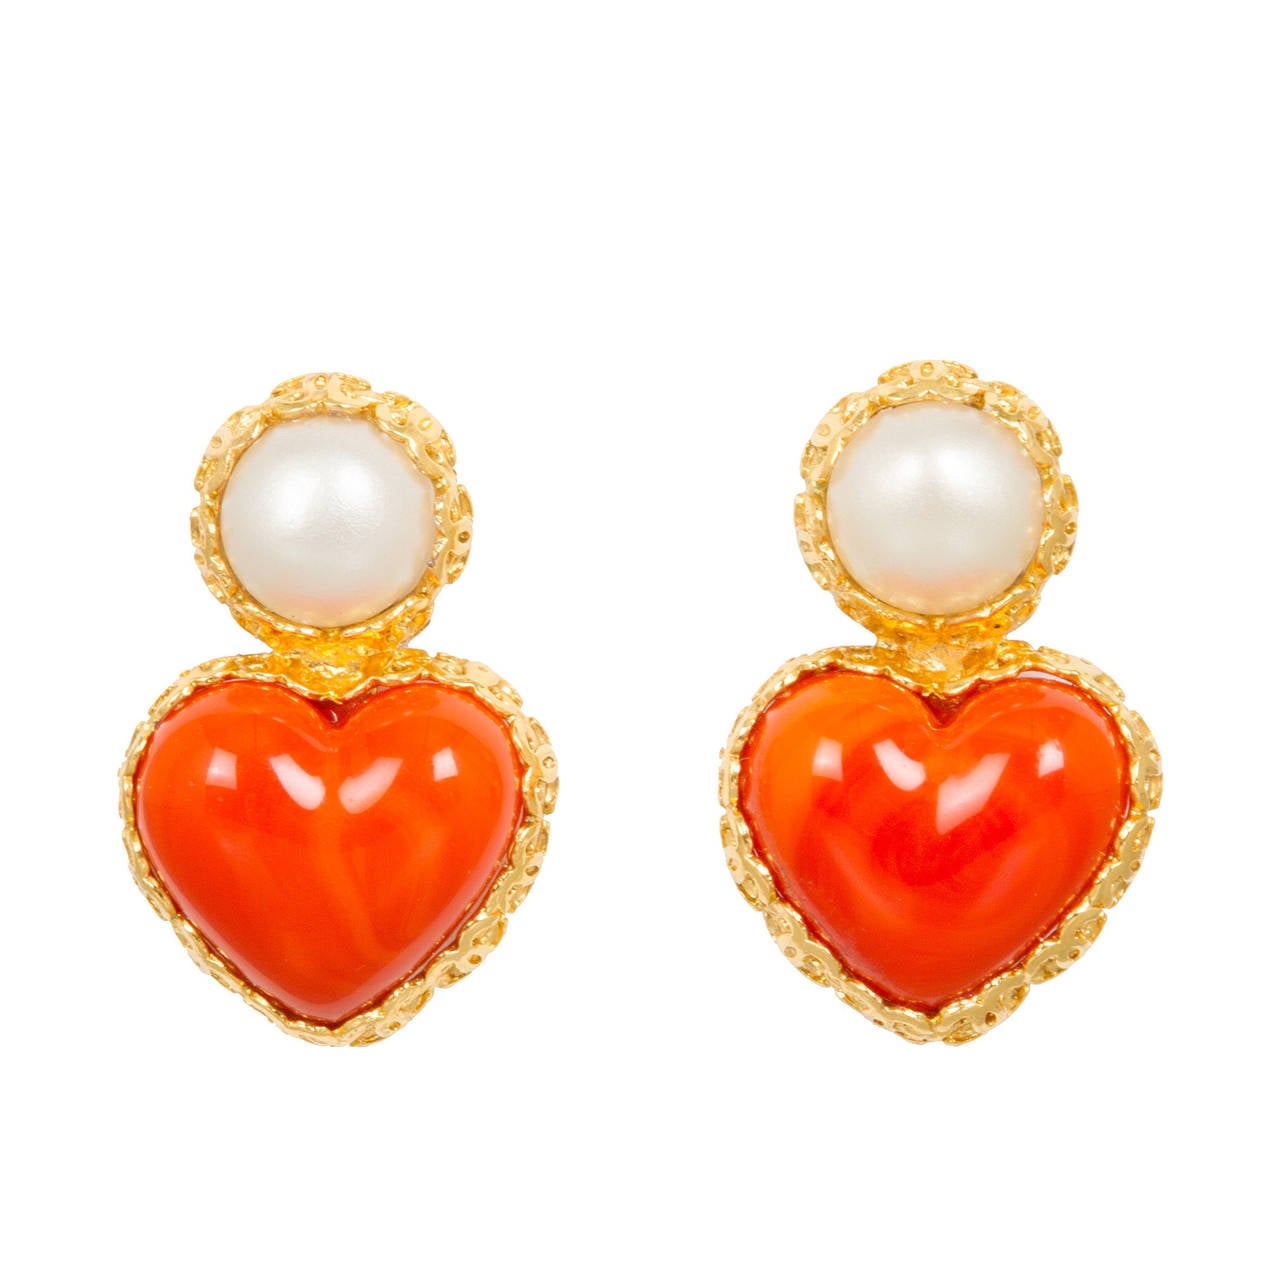 Pair of Vintage CHANEL Poured Glass Heart Earrings